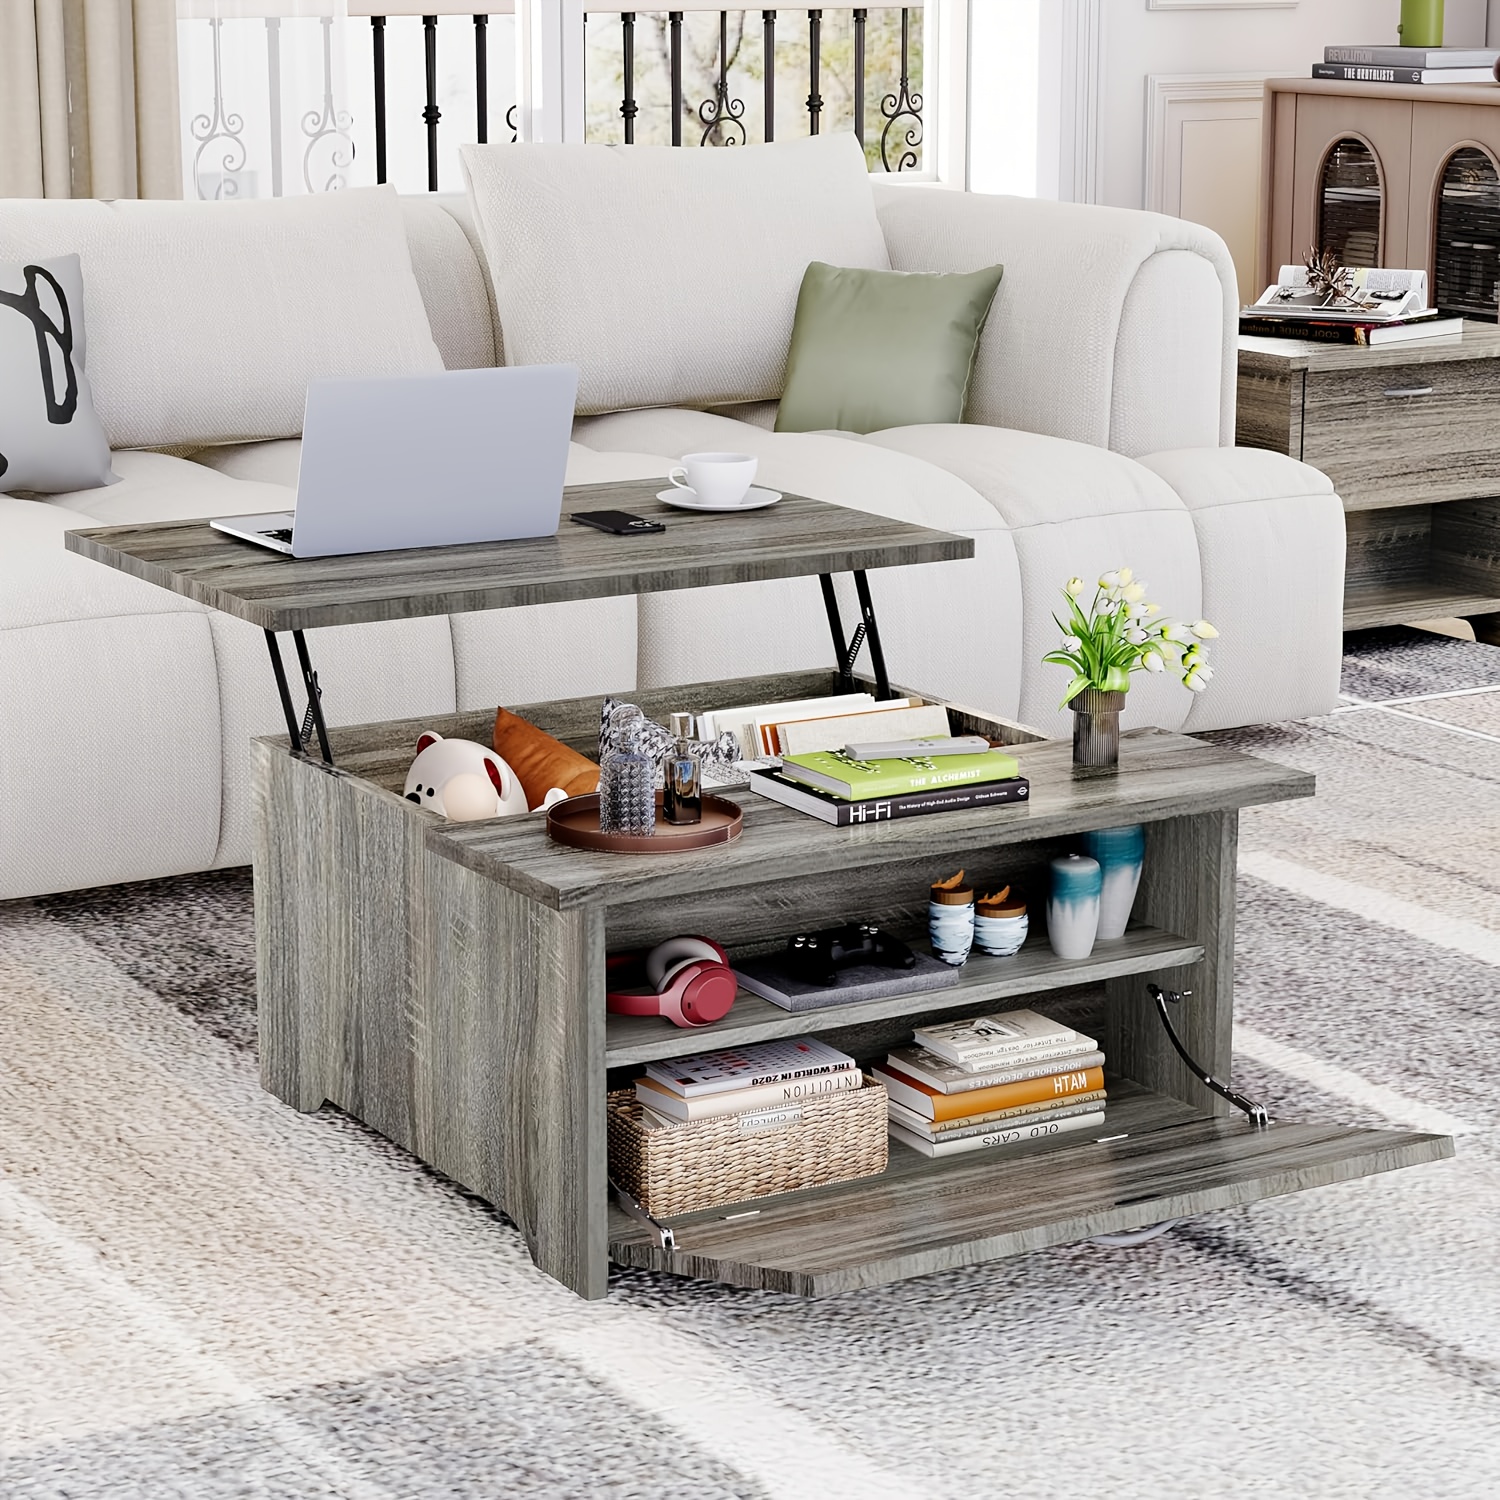 

Lift Top Coffee Table With Storage, 31.5'' Wood Square Coffee Table With Large Hidden Storage Compartments And Adjustable Shelf, Rustic Center Table For Living Room